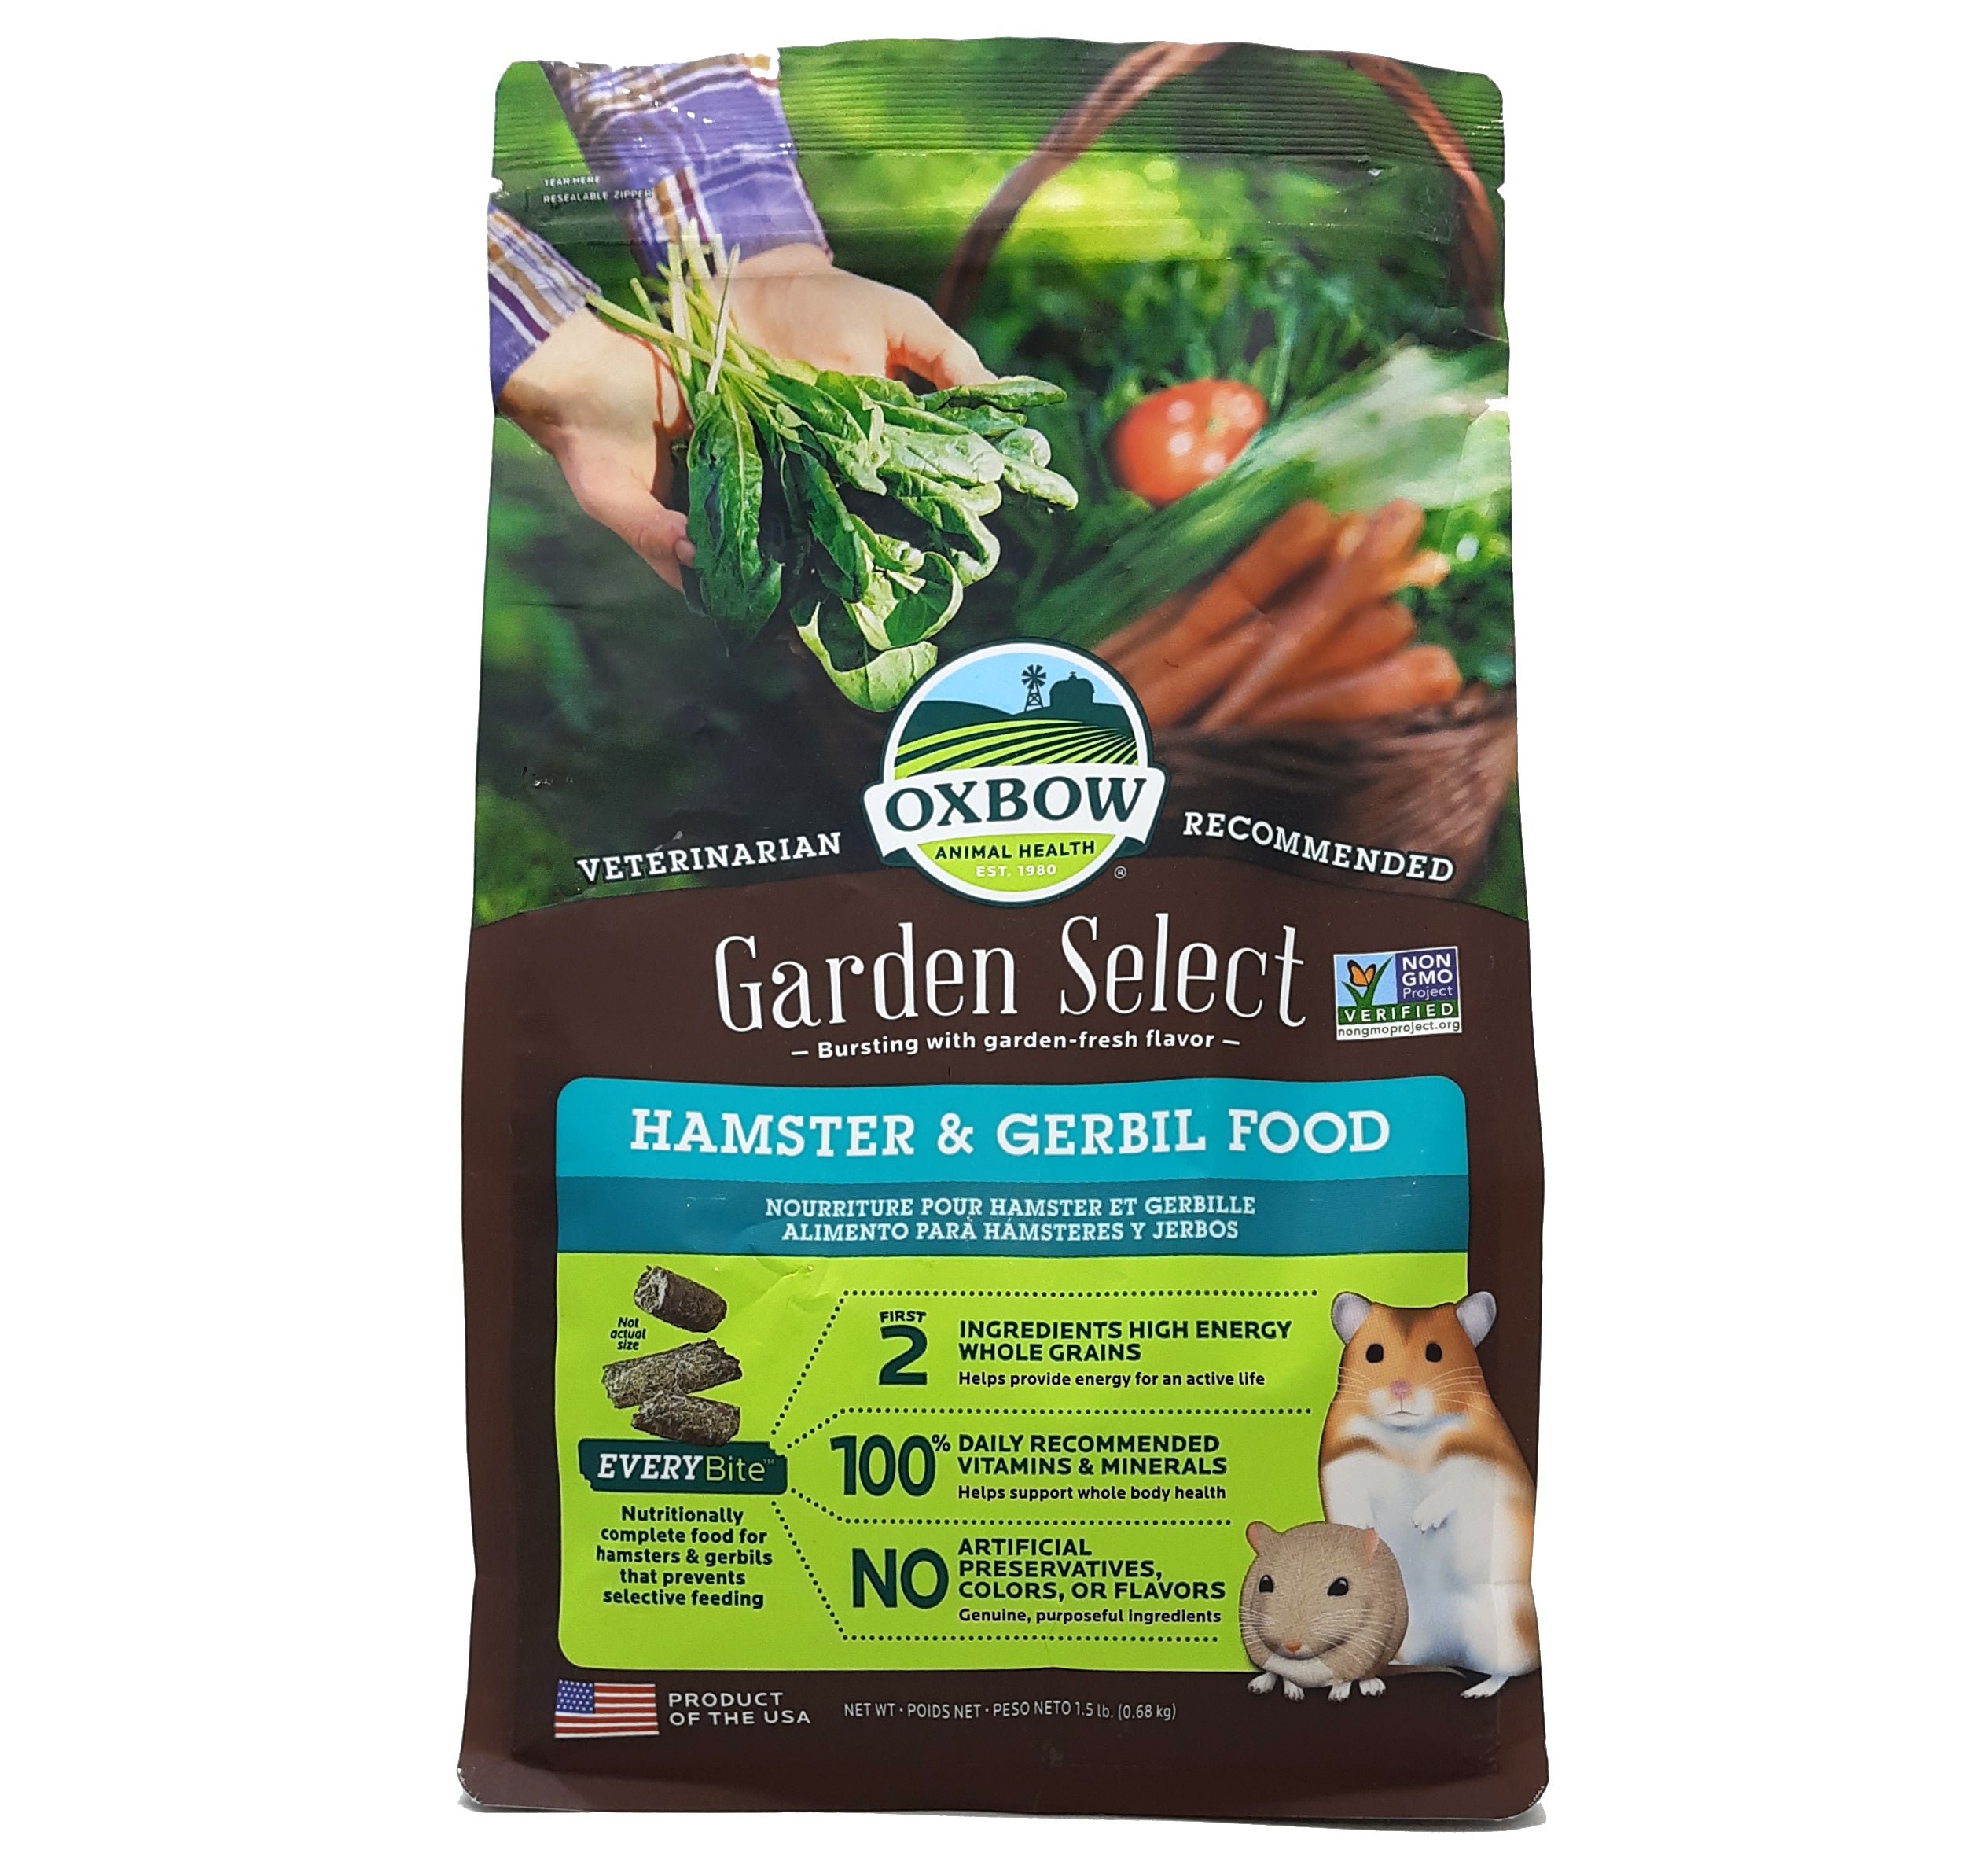 Alimento Para Hamster y Jerbo Garden Select Oxbow 680grs